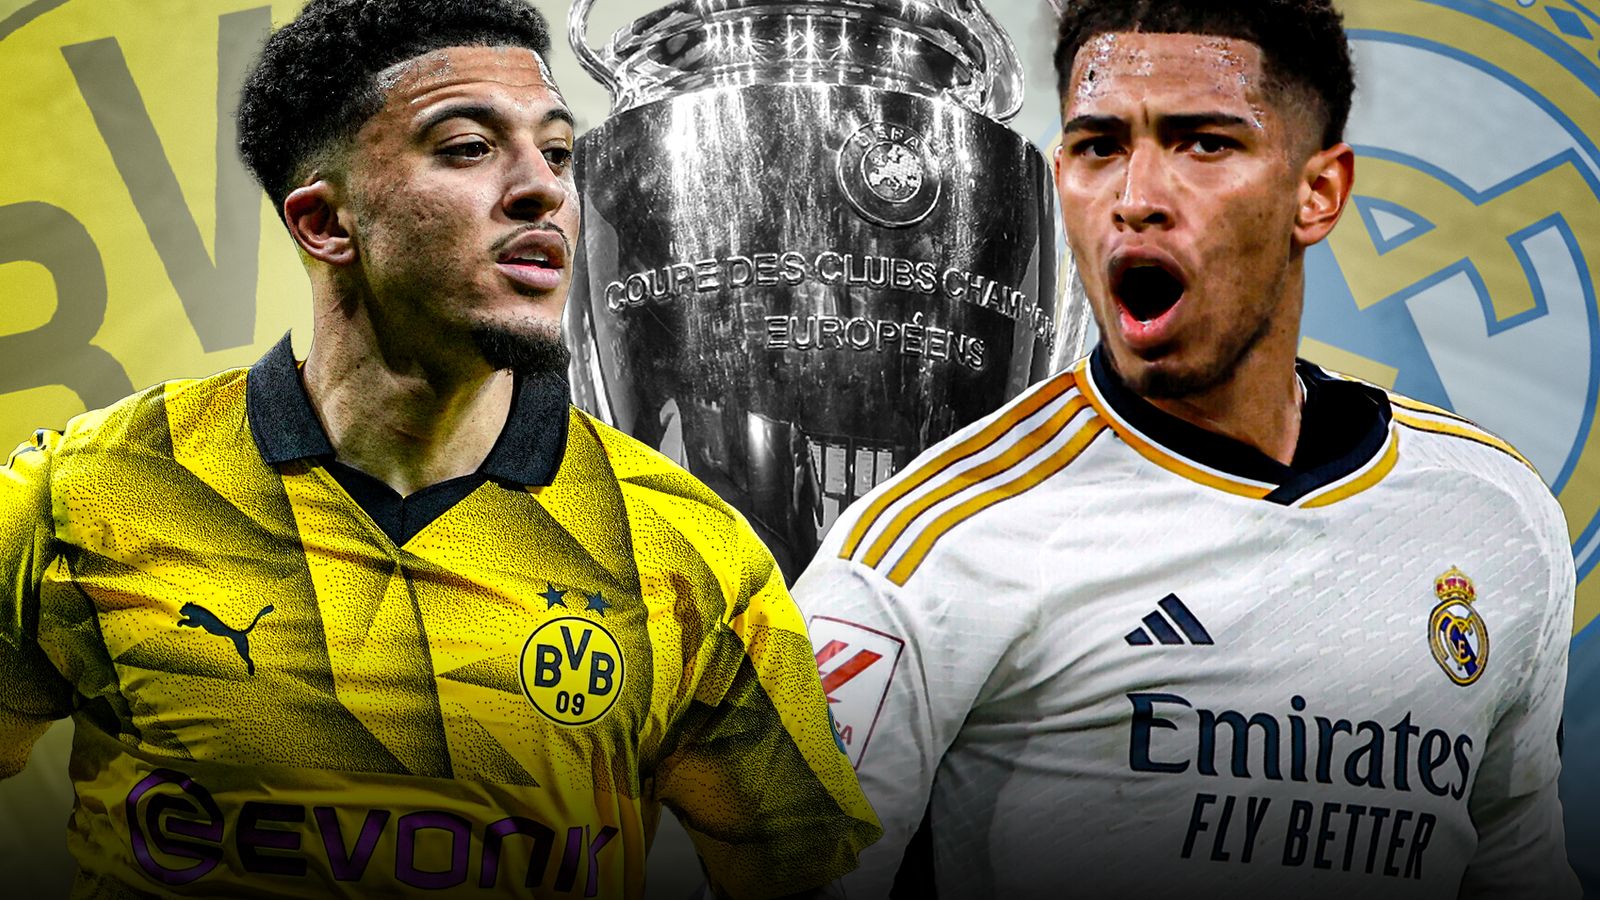 Champions League final - Borussia Dortmund vs Real Madrid: Live updates, match commentary, match report, how to follow | Football News | Sky Sports